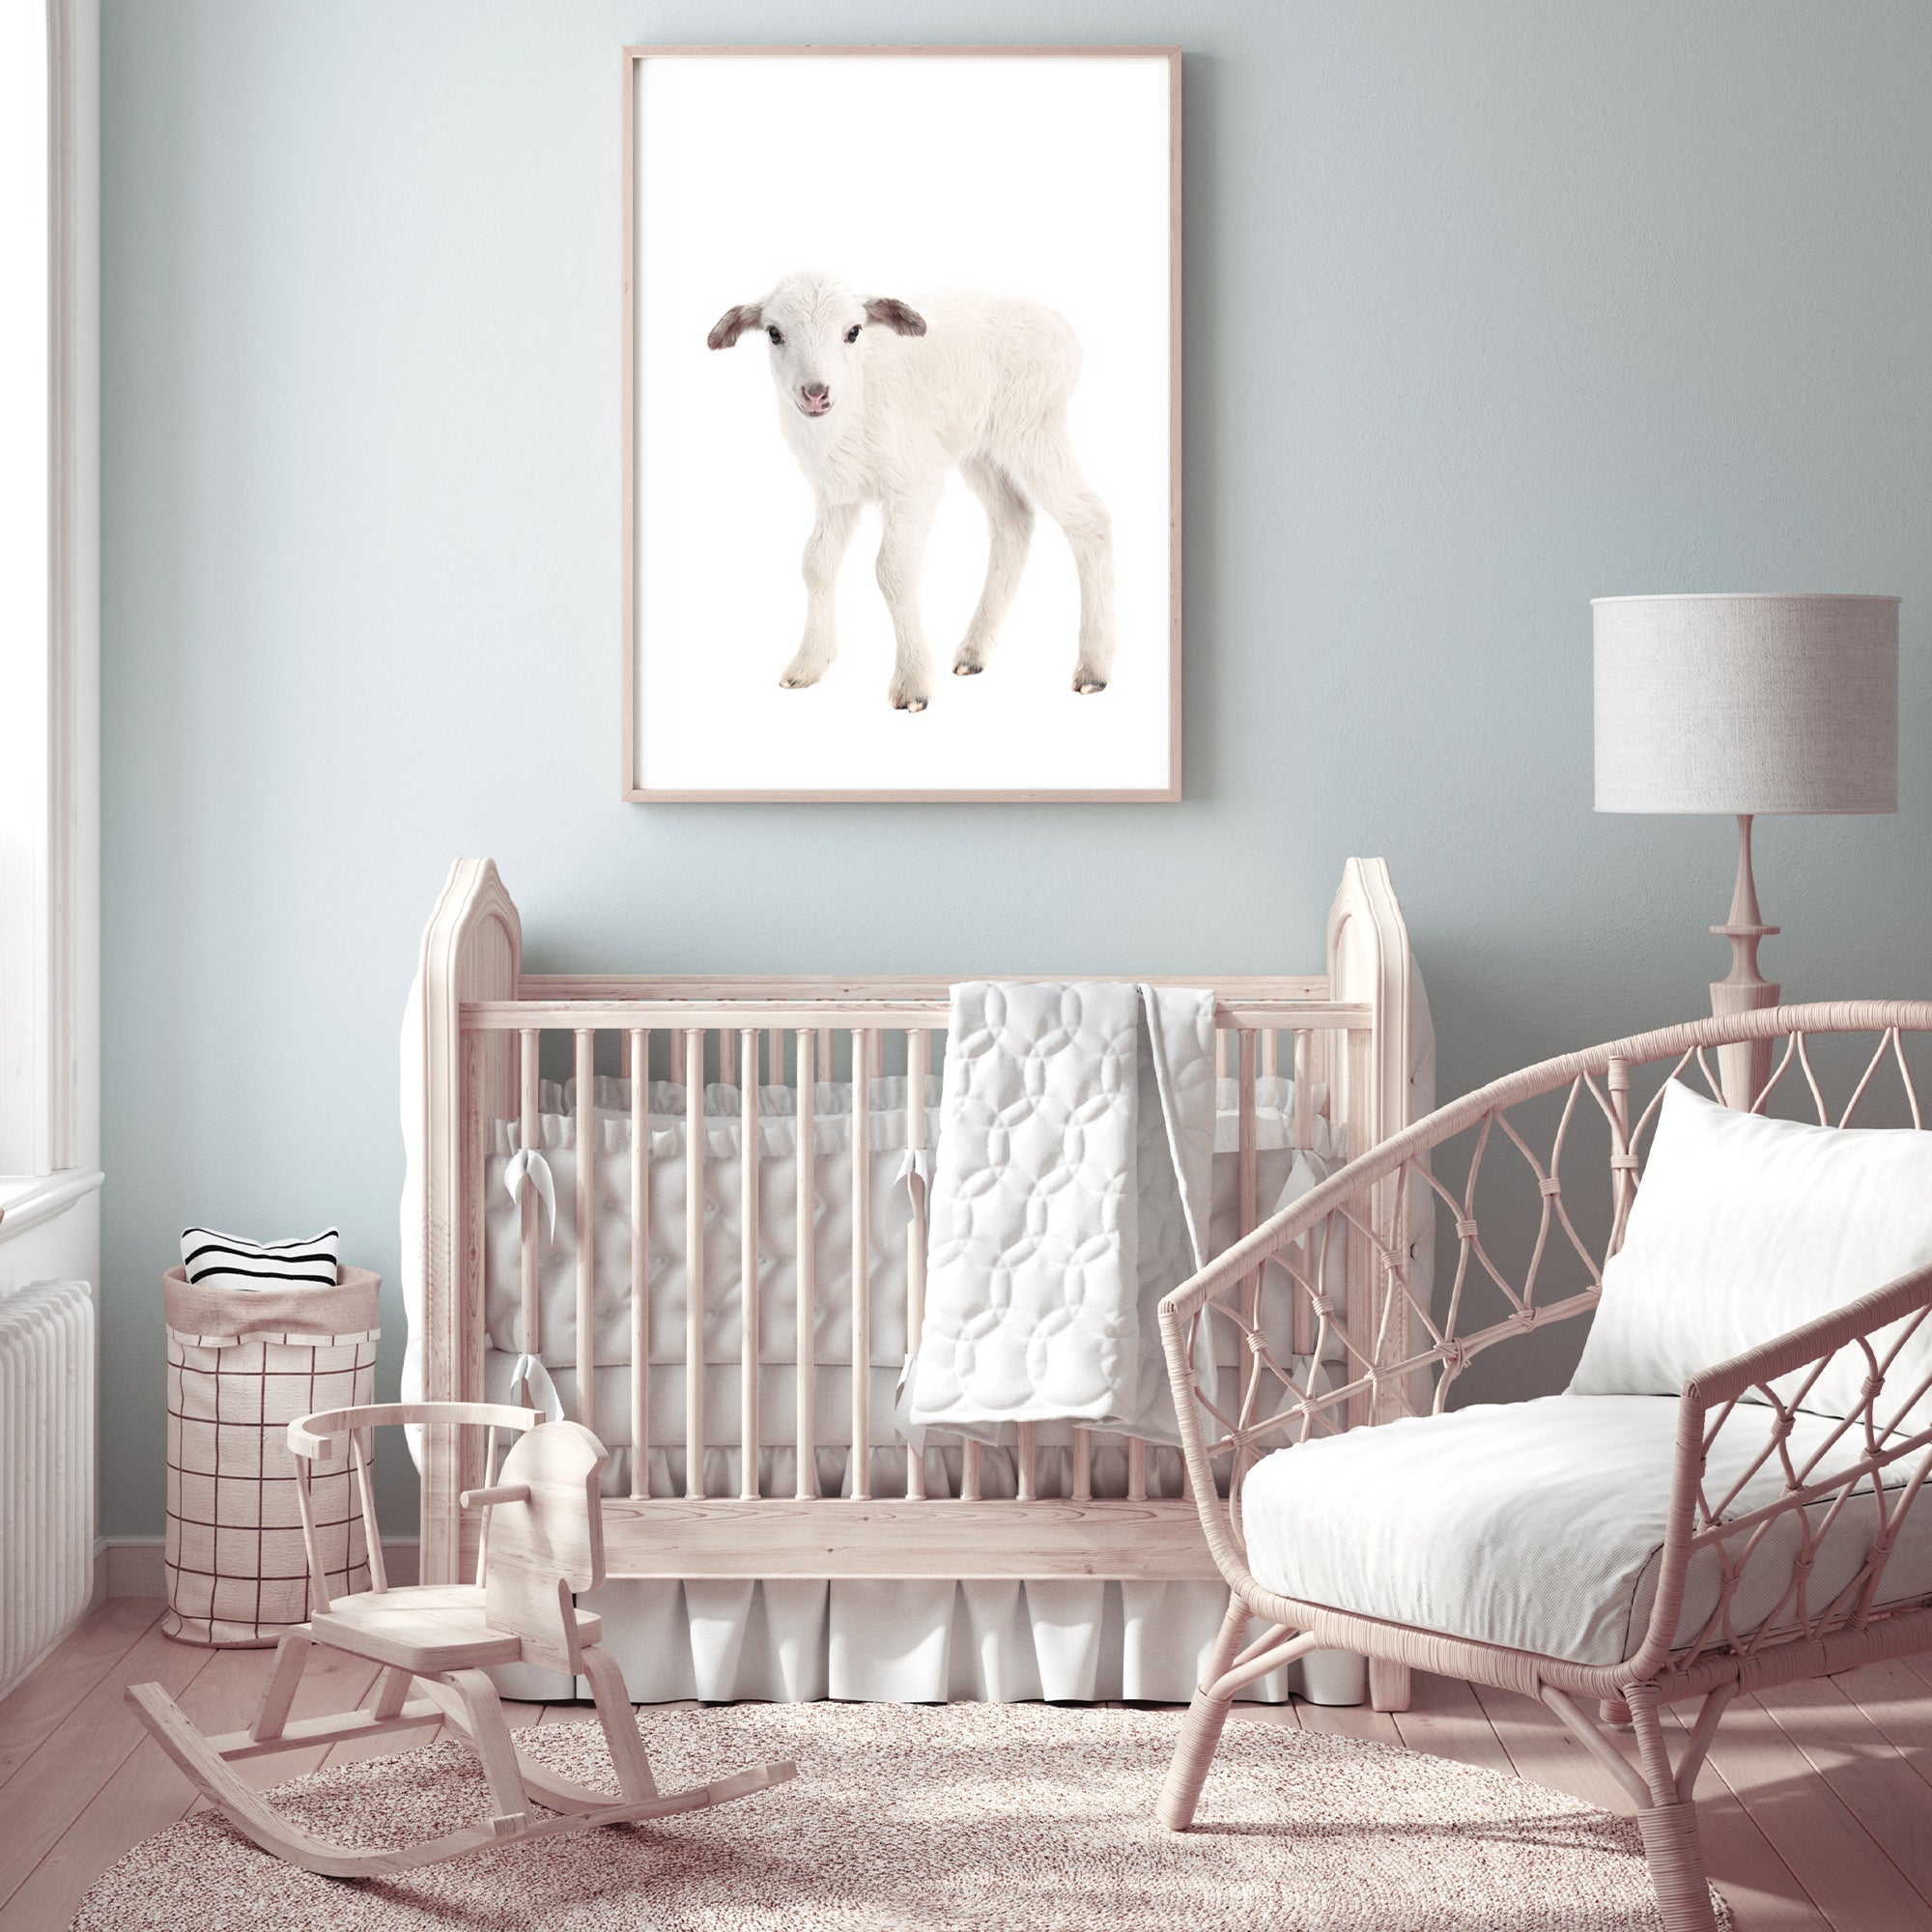 Featuring the animal Baby Lamb photo art print, available in an unframed poster print, stretched canvas or with a timber, white or black frame.